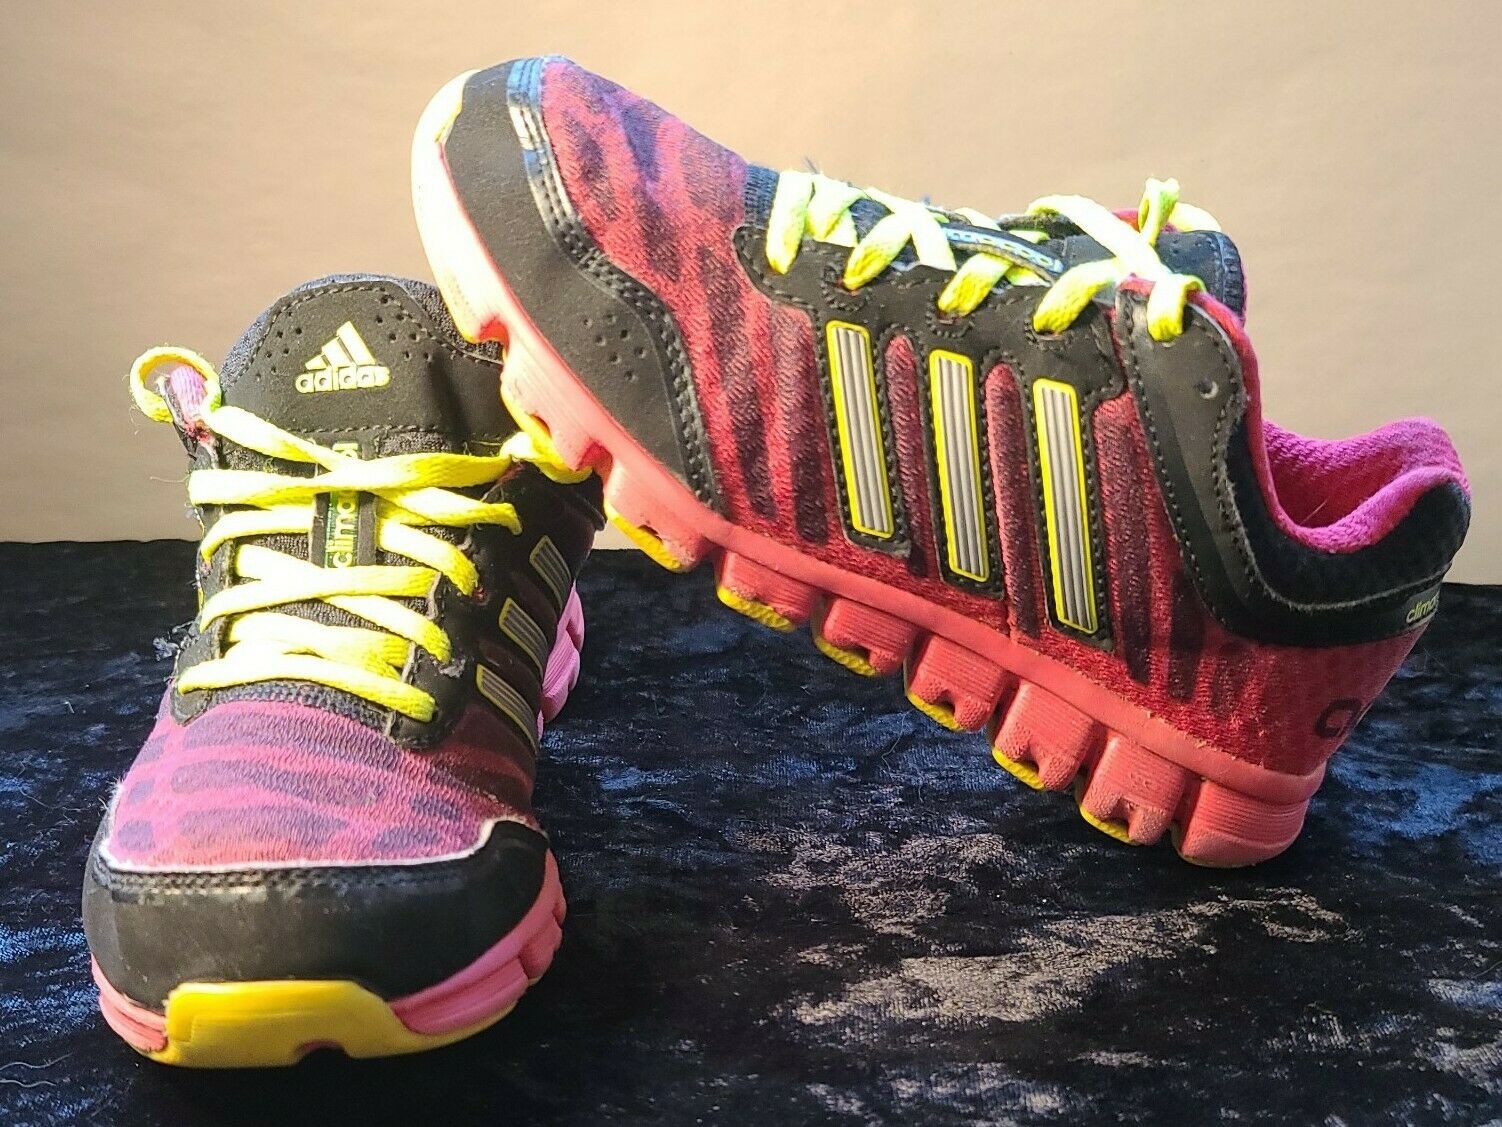 Adidas Climacool youth Lightweight Sneakers Shoes Pink Yellow Mesh Size 3.5